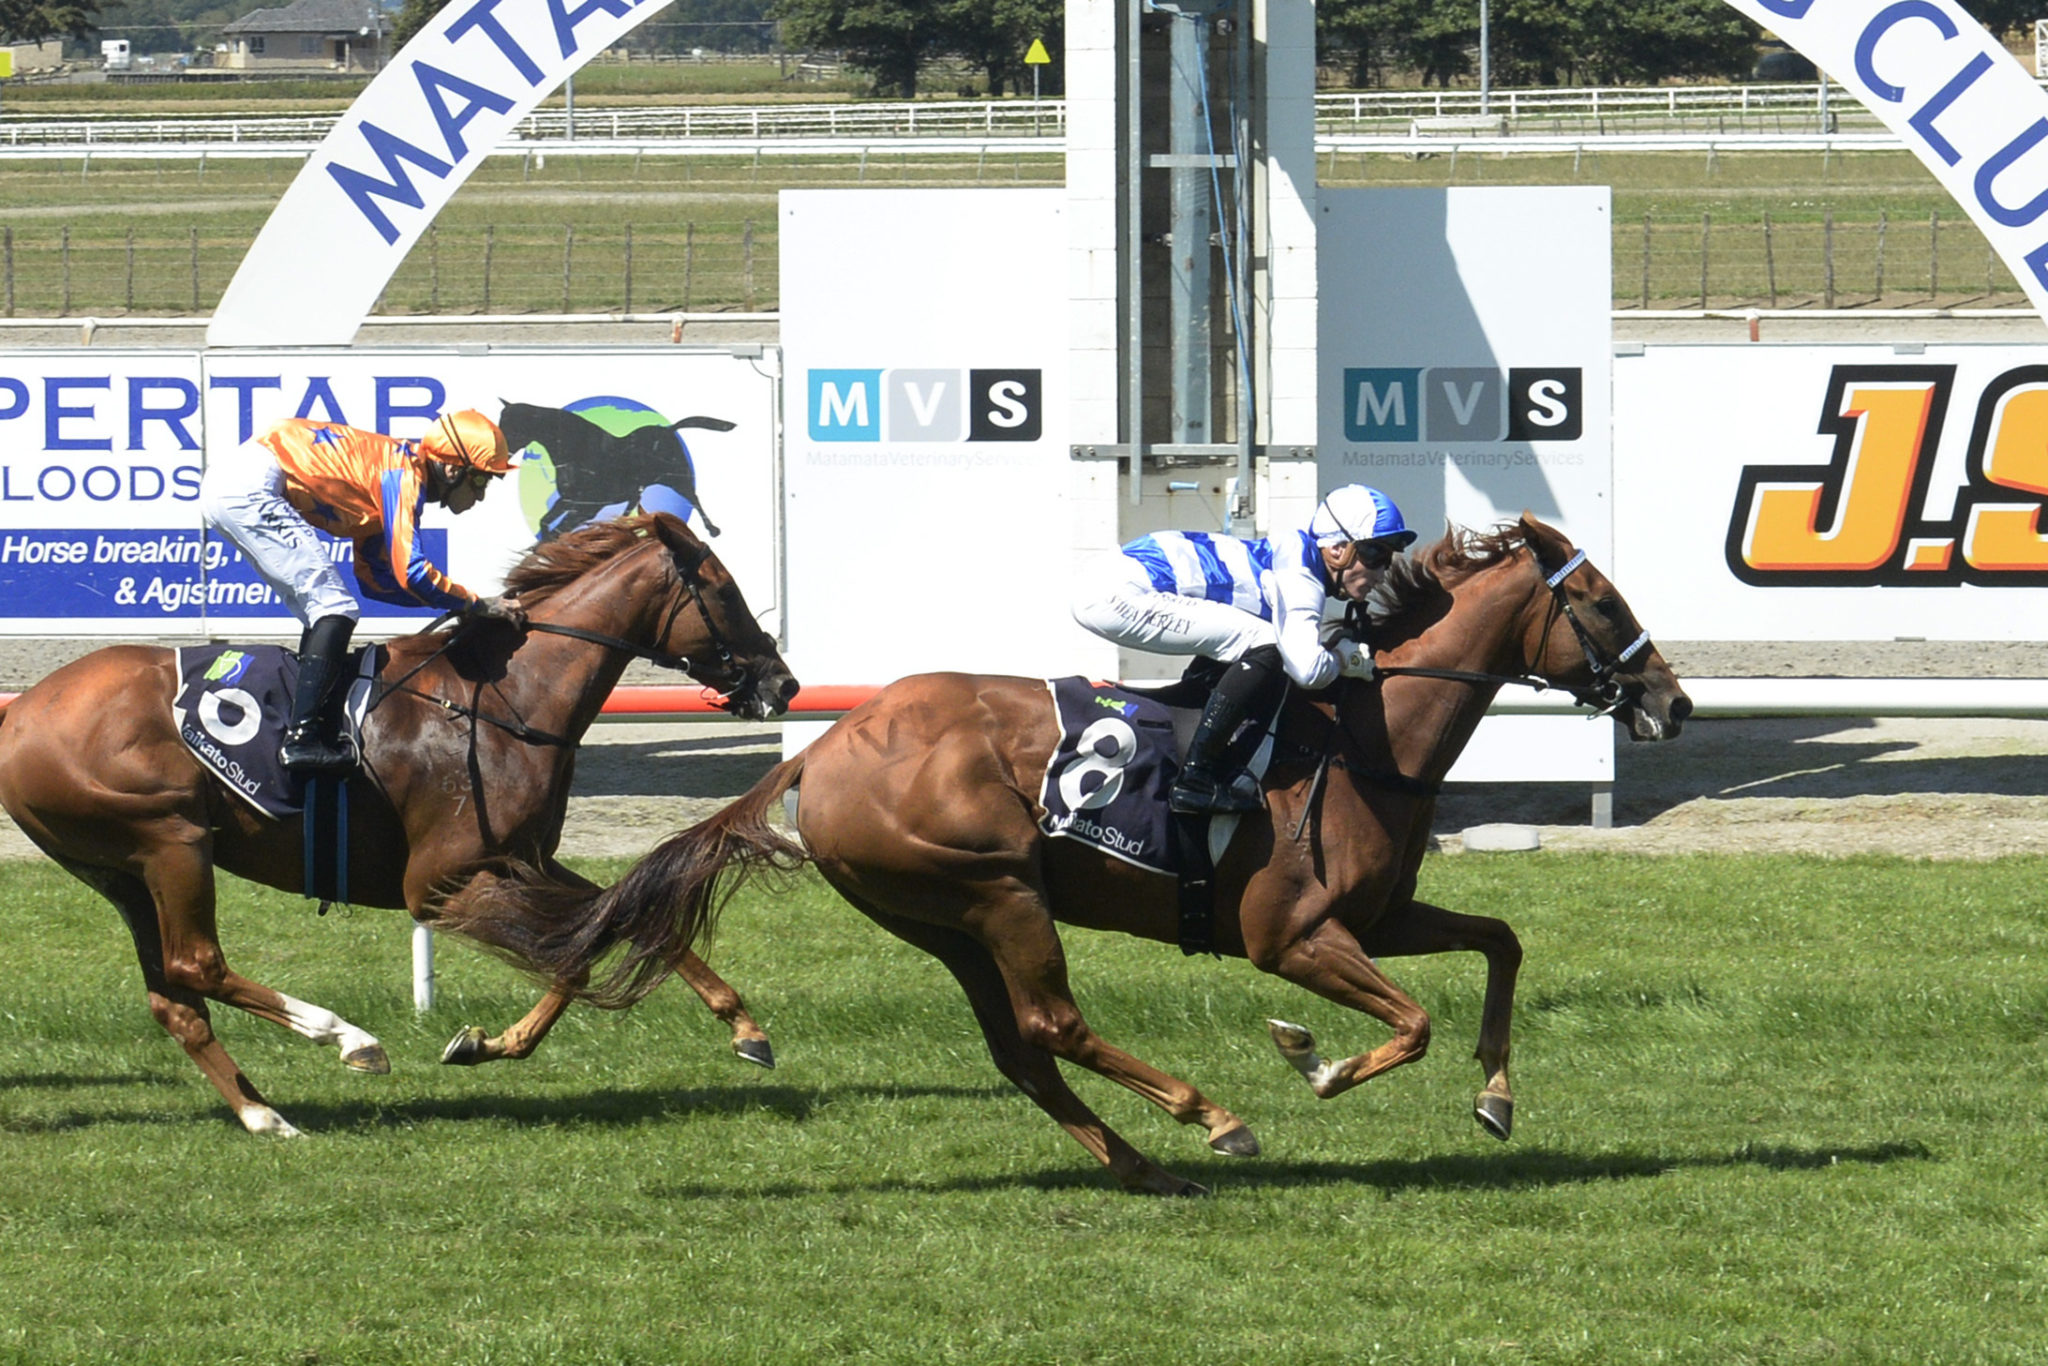 SIDE BY SIDE SOUTH WAIKATO 17 3 2021 RACE IMAGES